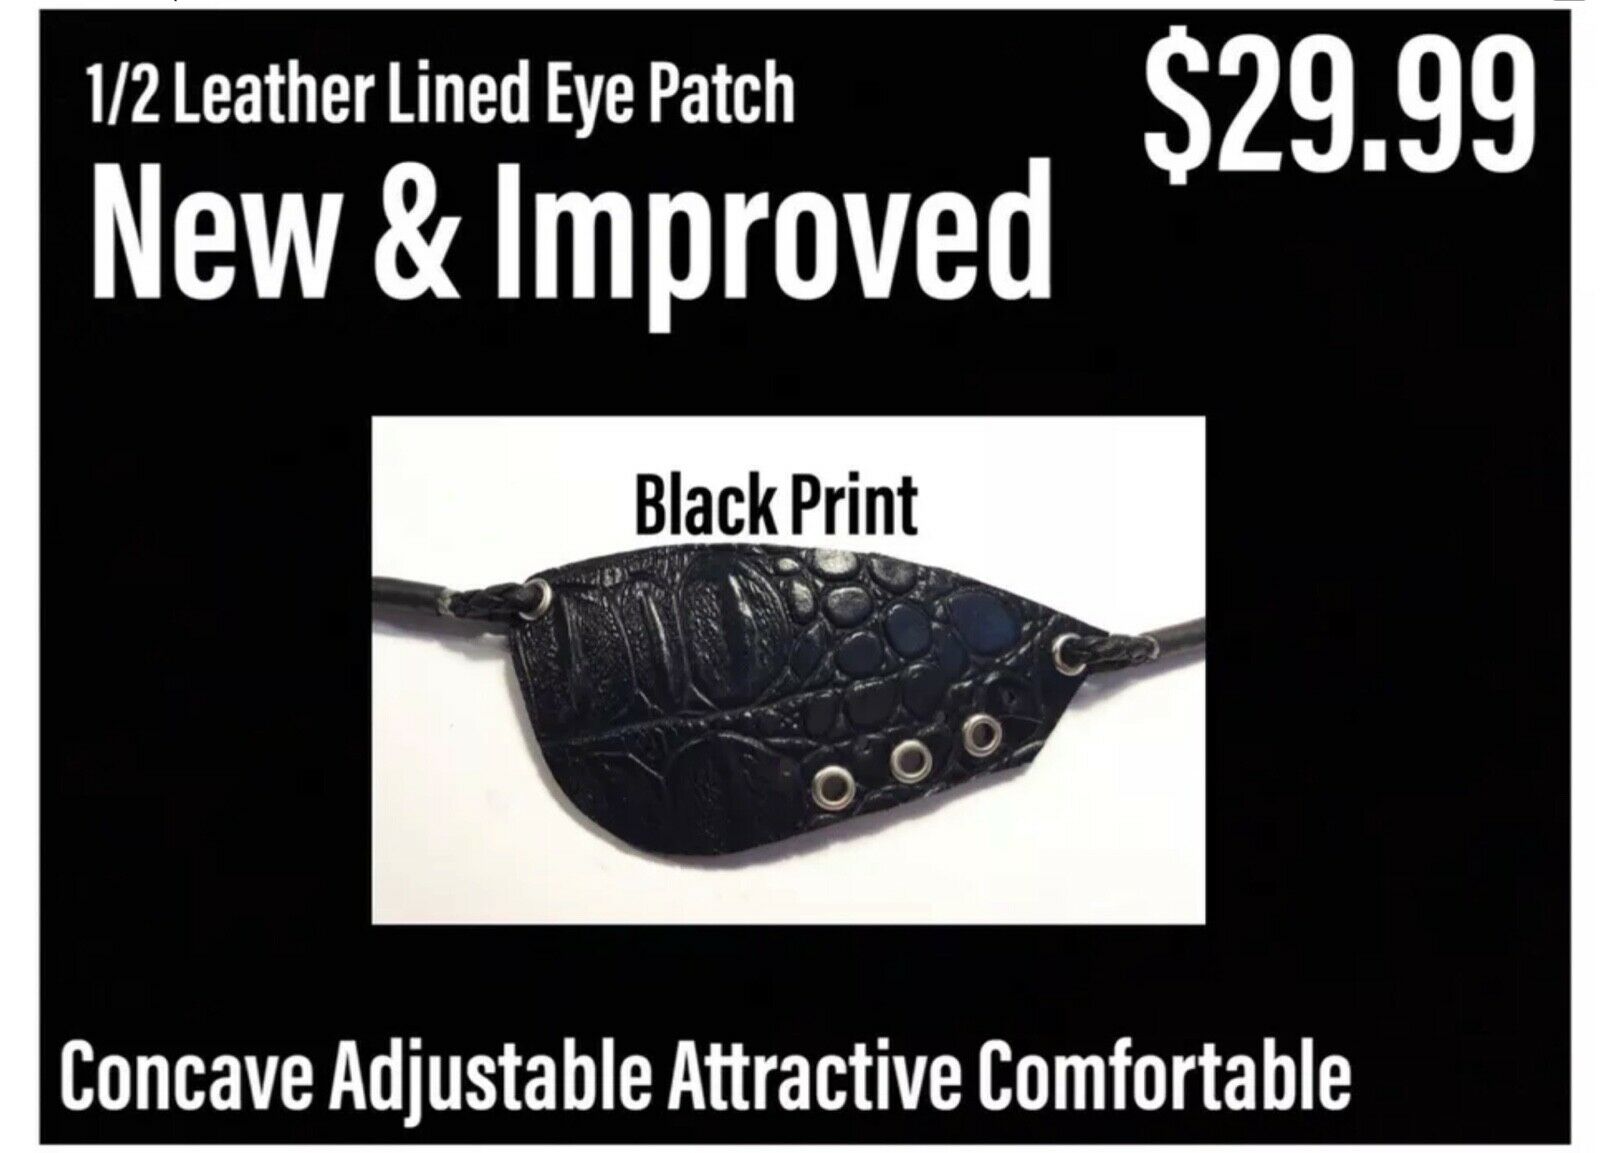 Black Print - Leather Lined Patch at Eye Patches R Us - C.O.A. - Crenshaw Cut